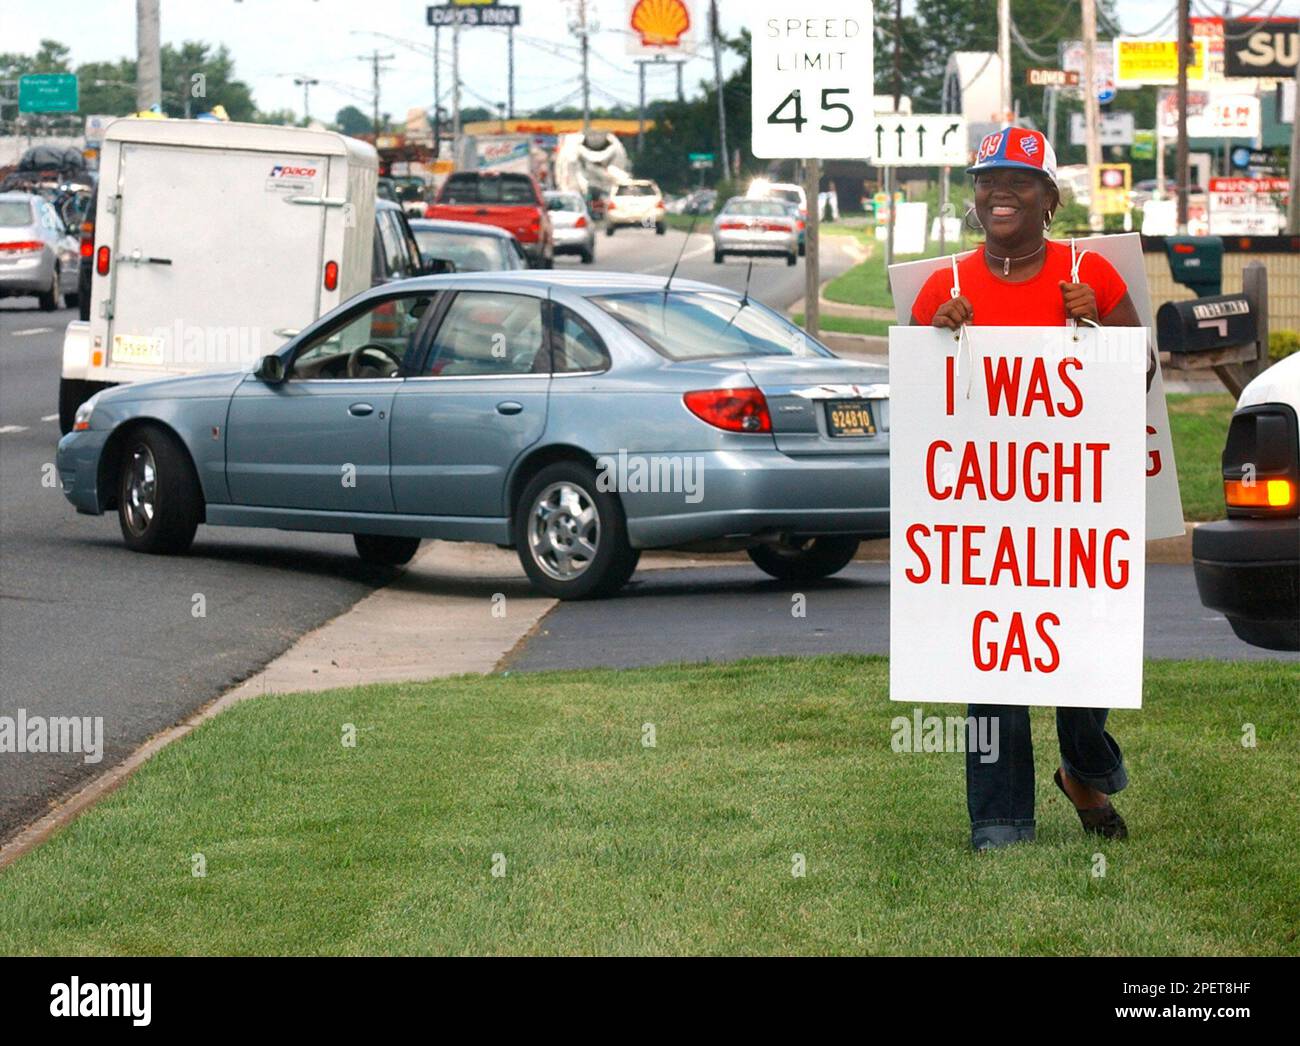 https://c8.alamy.com/comp/2PET8HF/sherelle-purnell-18-of-salisbury-md-walks-along-route-13-wearing-a-sign-reading-i-was-caught-stealing-gas-in-front-of-the-tiger-mart-gas-station-she-stole-from-friday-july-30-2004-in-salisbury-md-on-april-4-purnell-pulled-up-to-a-pump-at-the-station-and-filled-her-car-with-278-gallons-of-fuel-according-to-court-records-purnell-drove-away-without-paying-for-the-gas-though-wicomico-county-district-court-judge-d-william-simpson-authorized-the-punishment-the-unconventional-sentencewas-the-brainchild-of-tiger-mart-store-manager-jan-phipps-according-to-the-alexandria-va-bas-2PET8HF.jpg